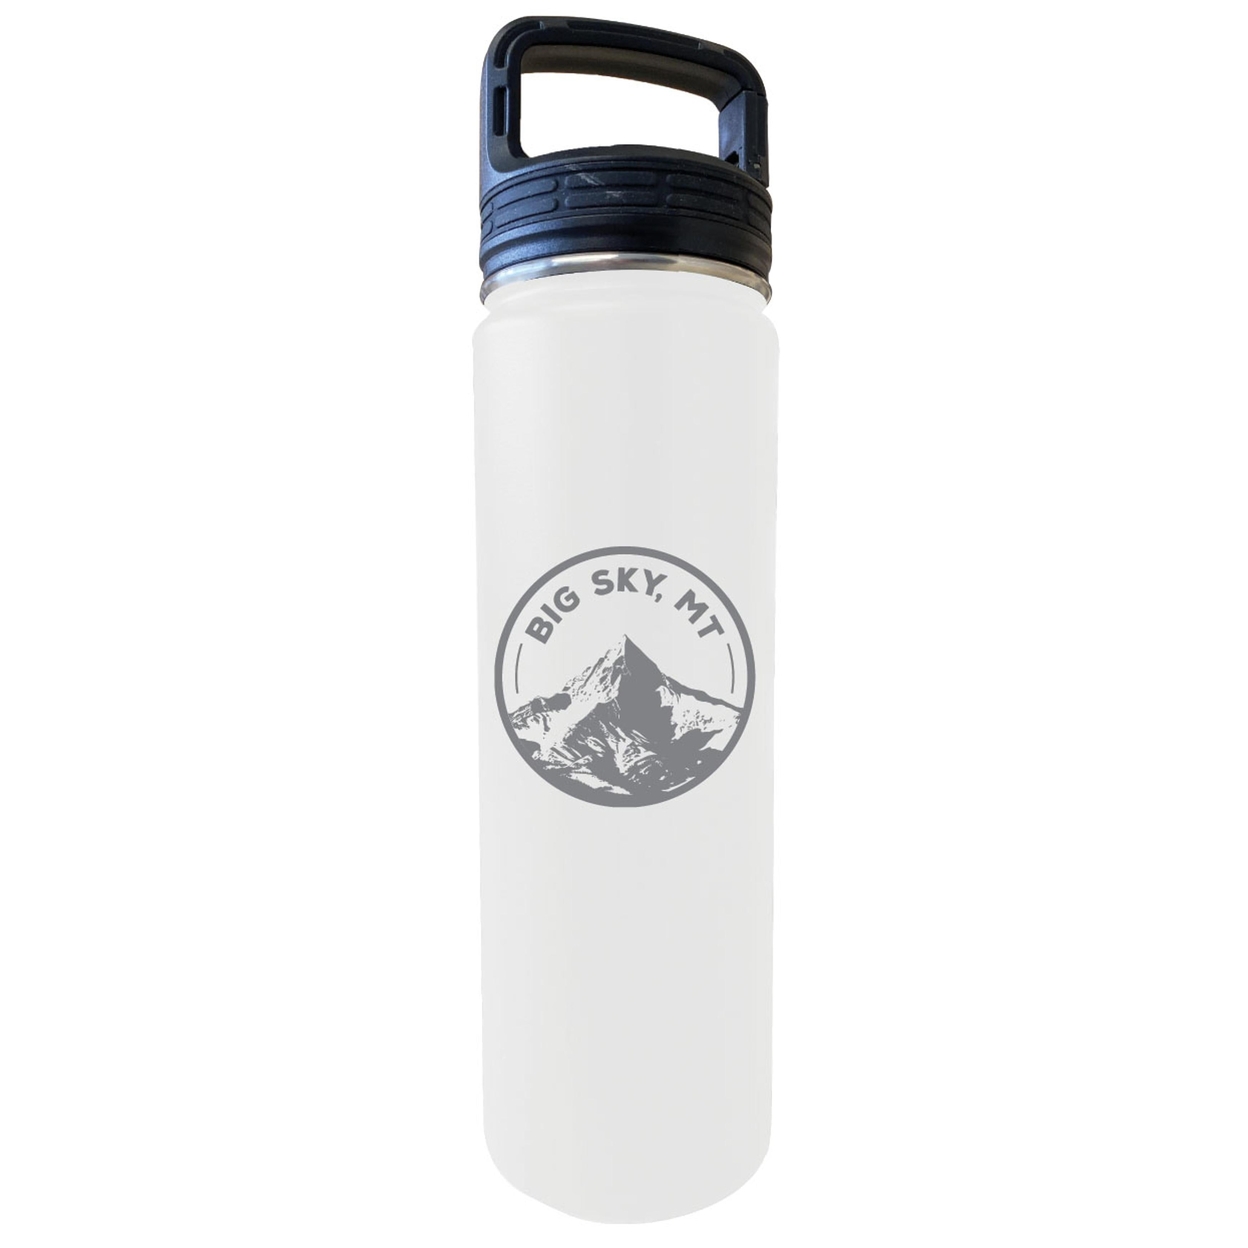 Big Sky Montana Souvenir 32 Oz Engraved Insulated Stainless Steel Tumbler - White,,2-Pack